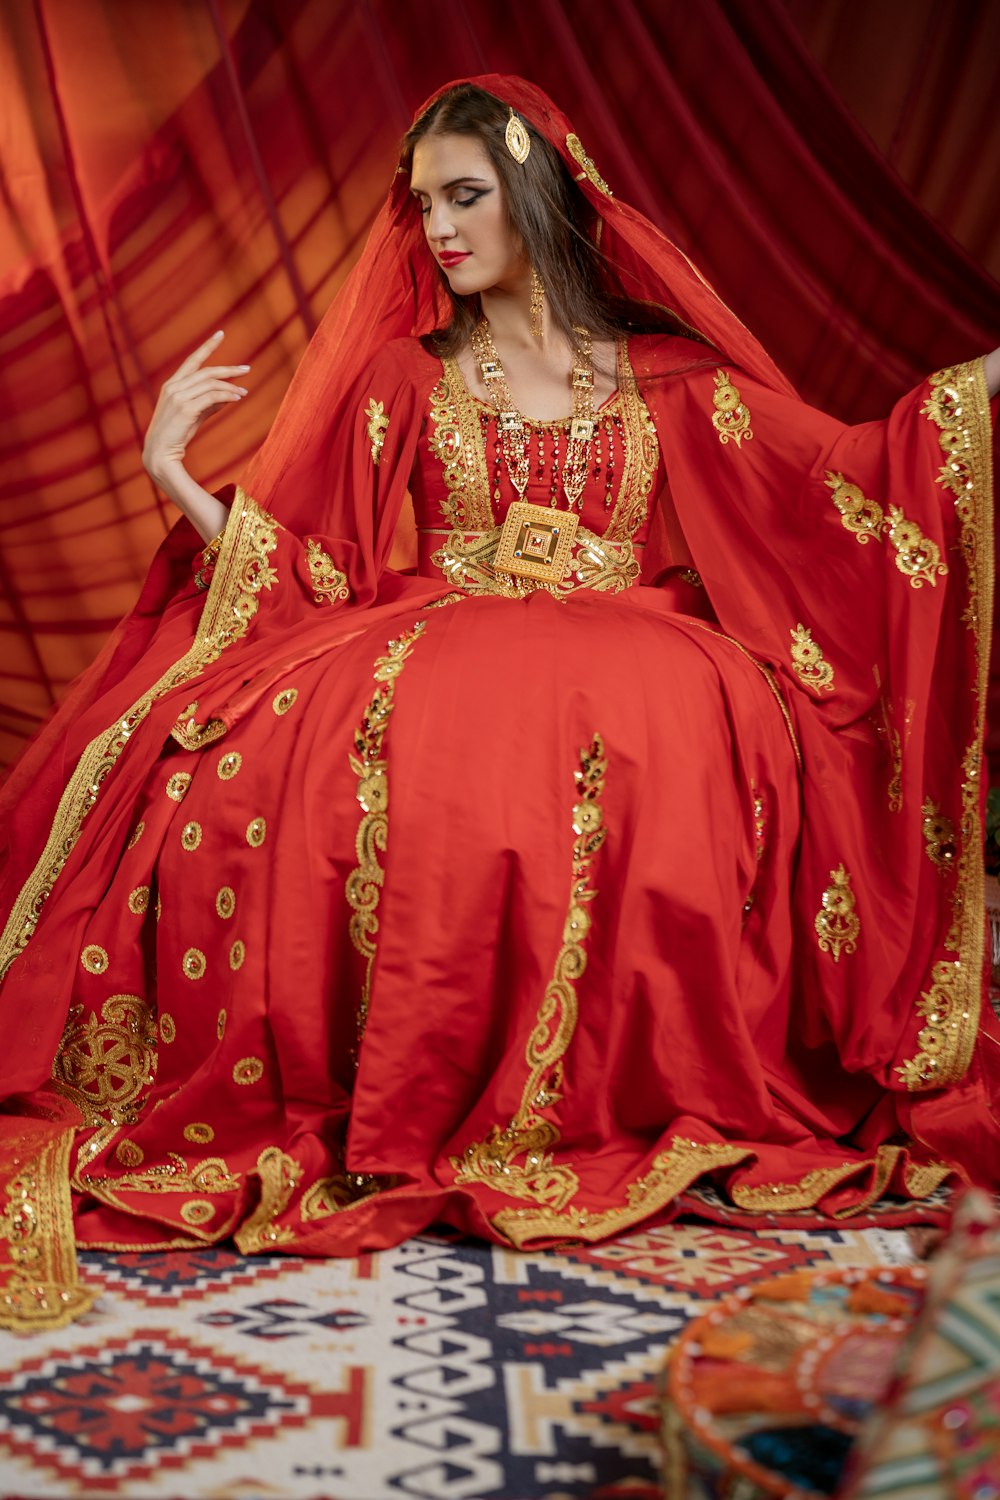 a woman in a red dress sitting on a rug